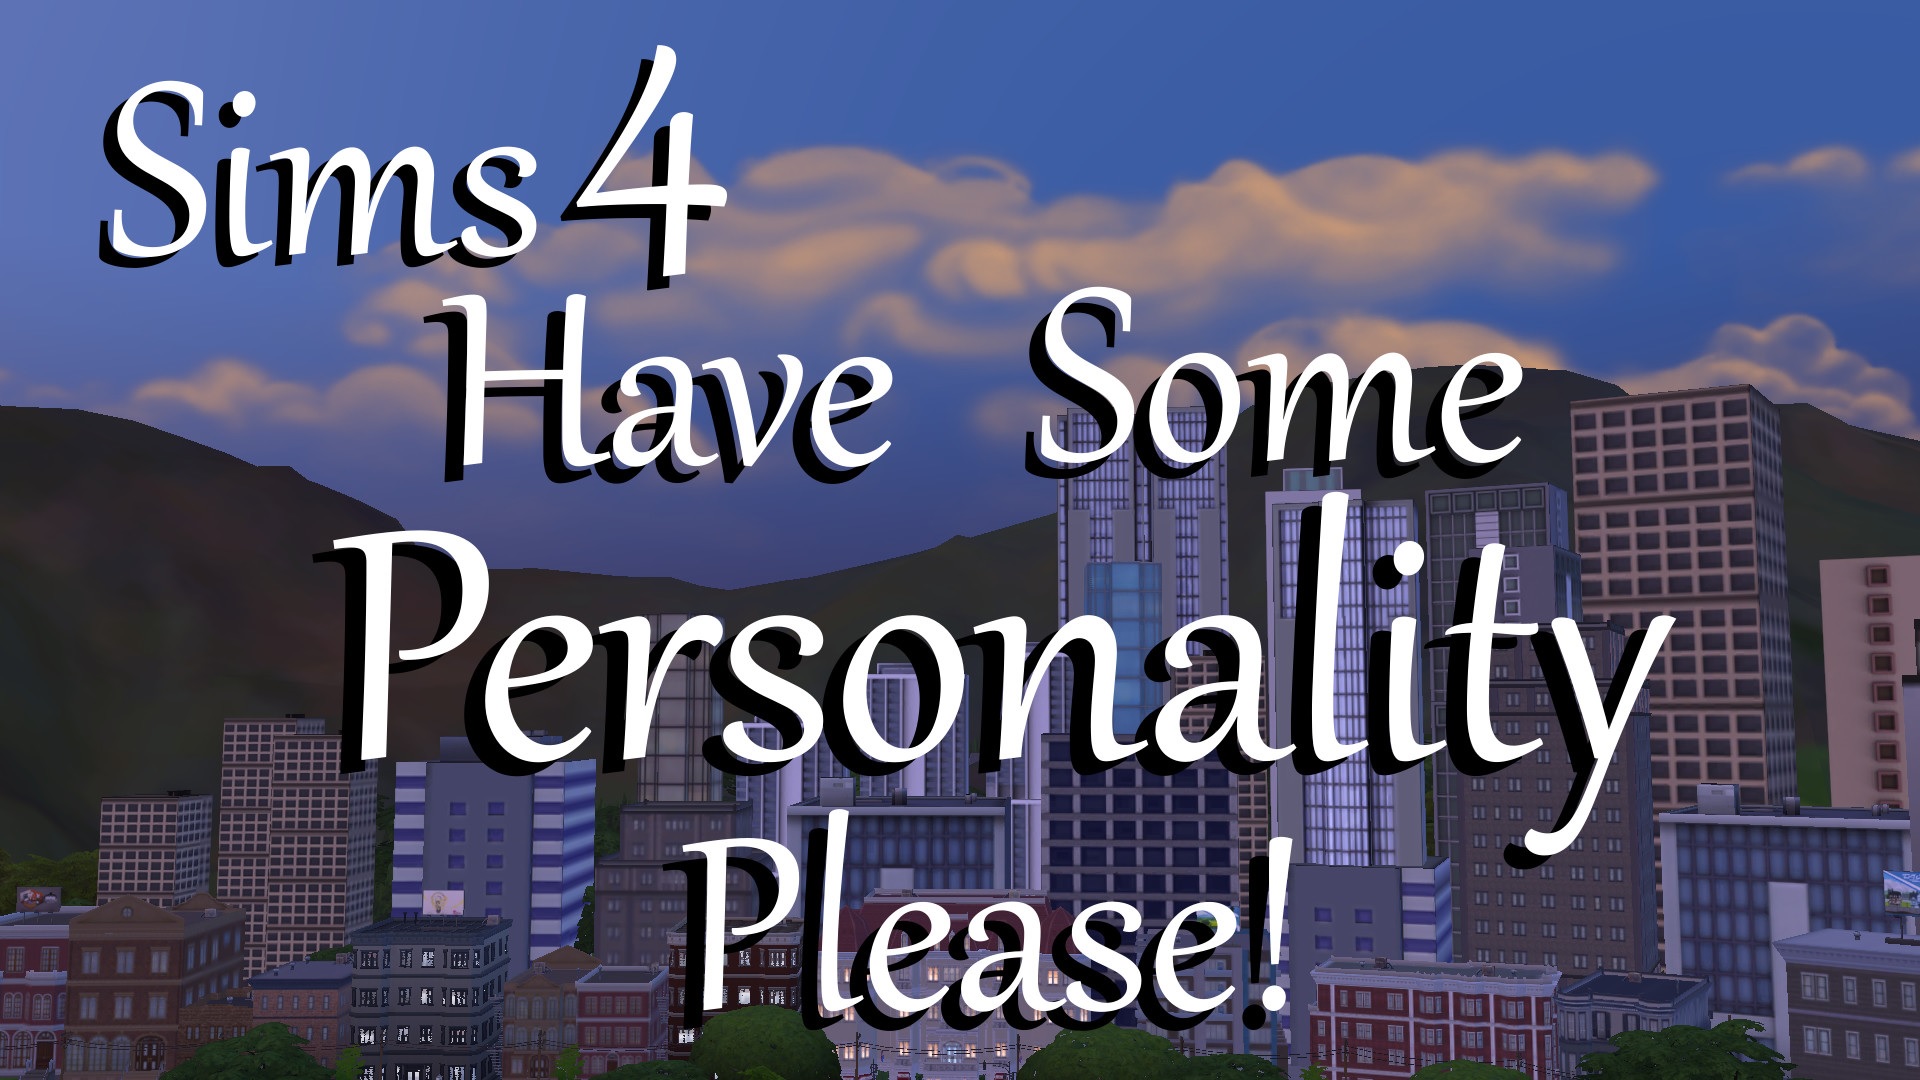 Sims 4 personality mod: Have some personality please